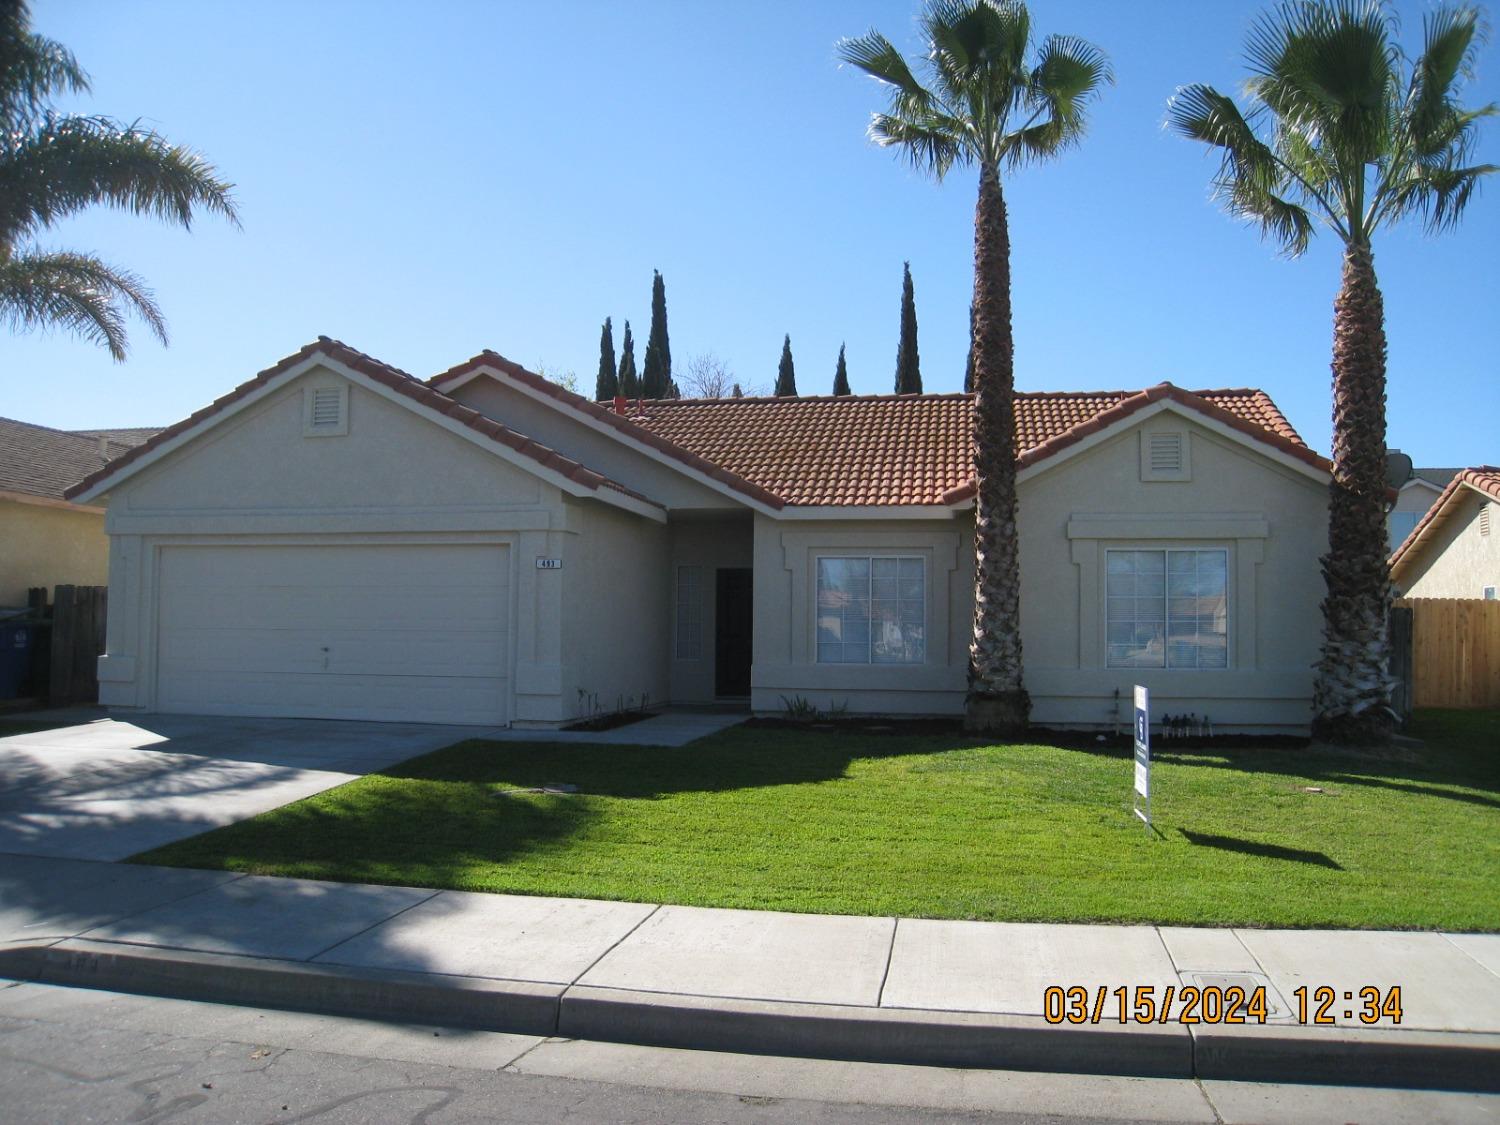 Photo of 493 Driftwood Ave in Los Banos, CA